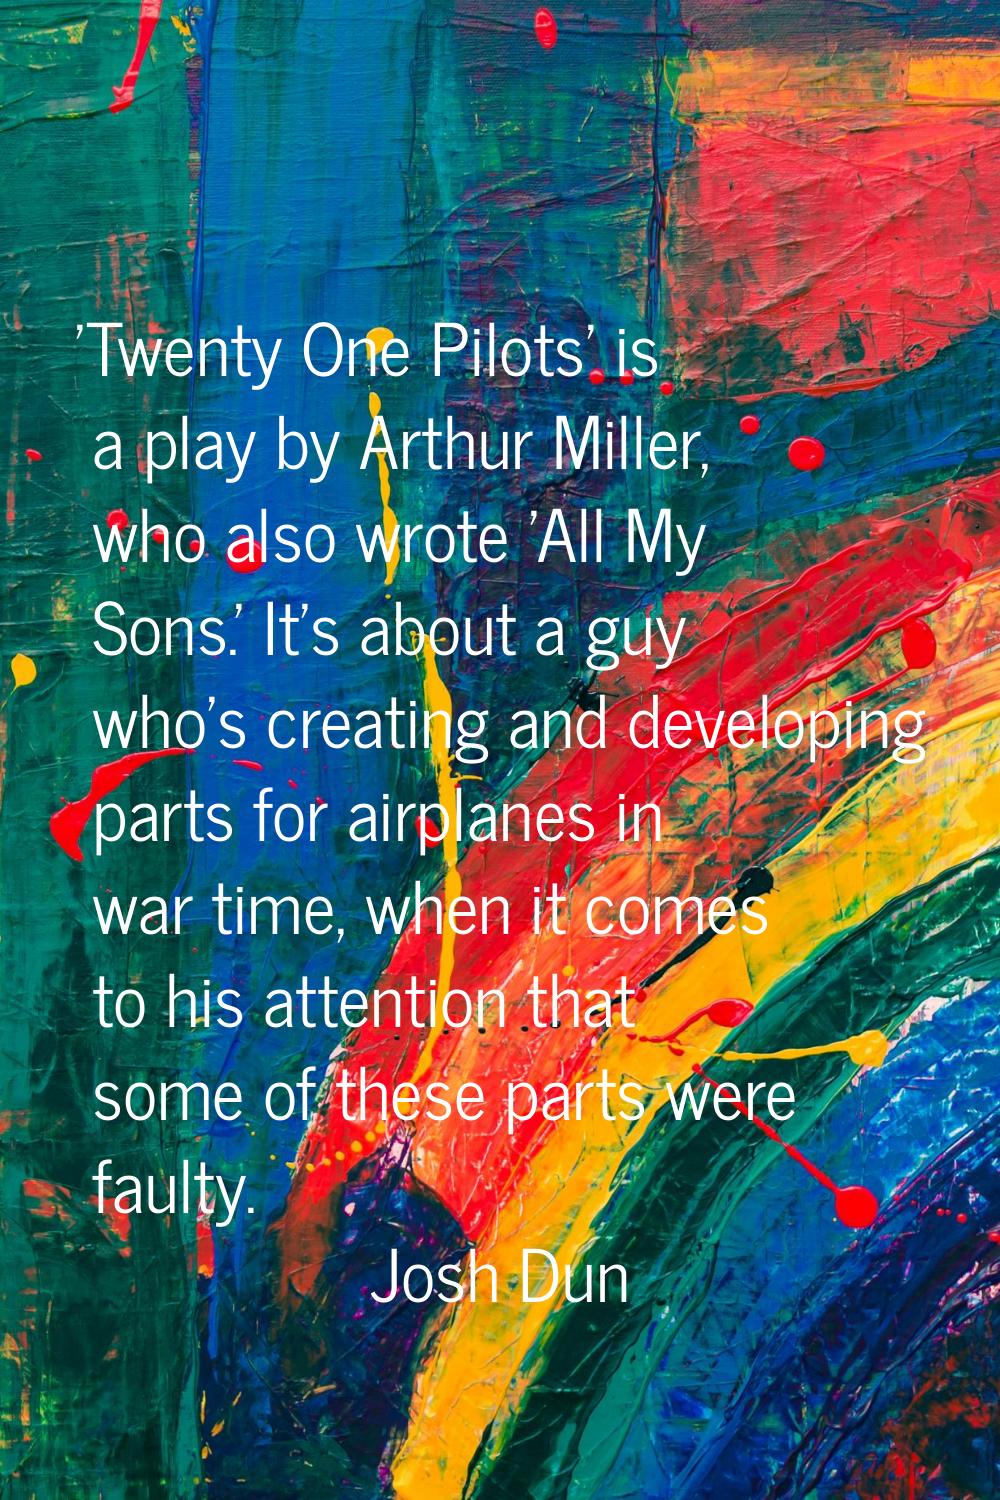 'Twenty One Pilots' is a play by Arthur Miller, who also wrote 'All My Sons.' It's about a guy who'